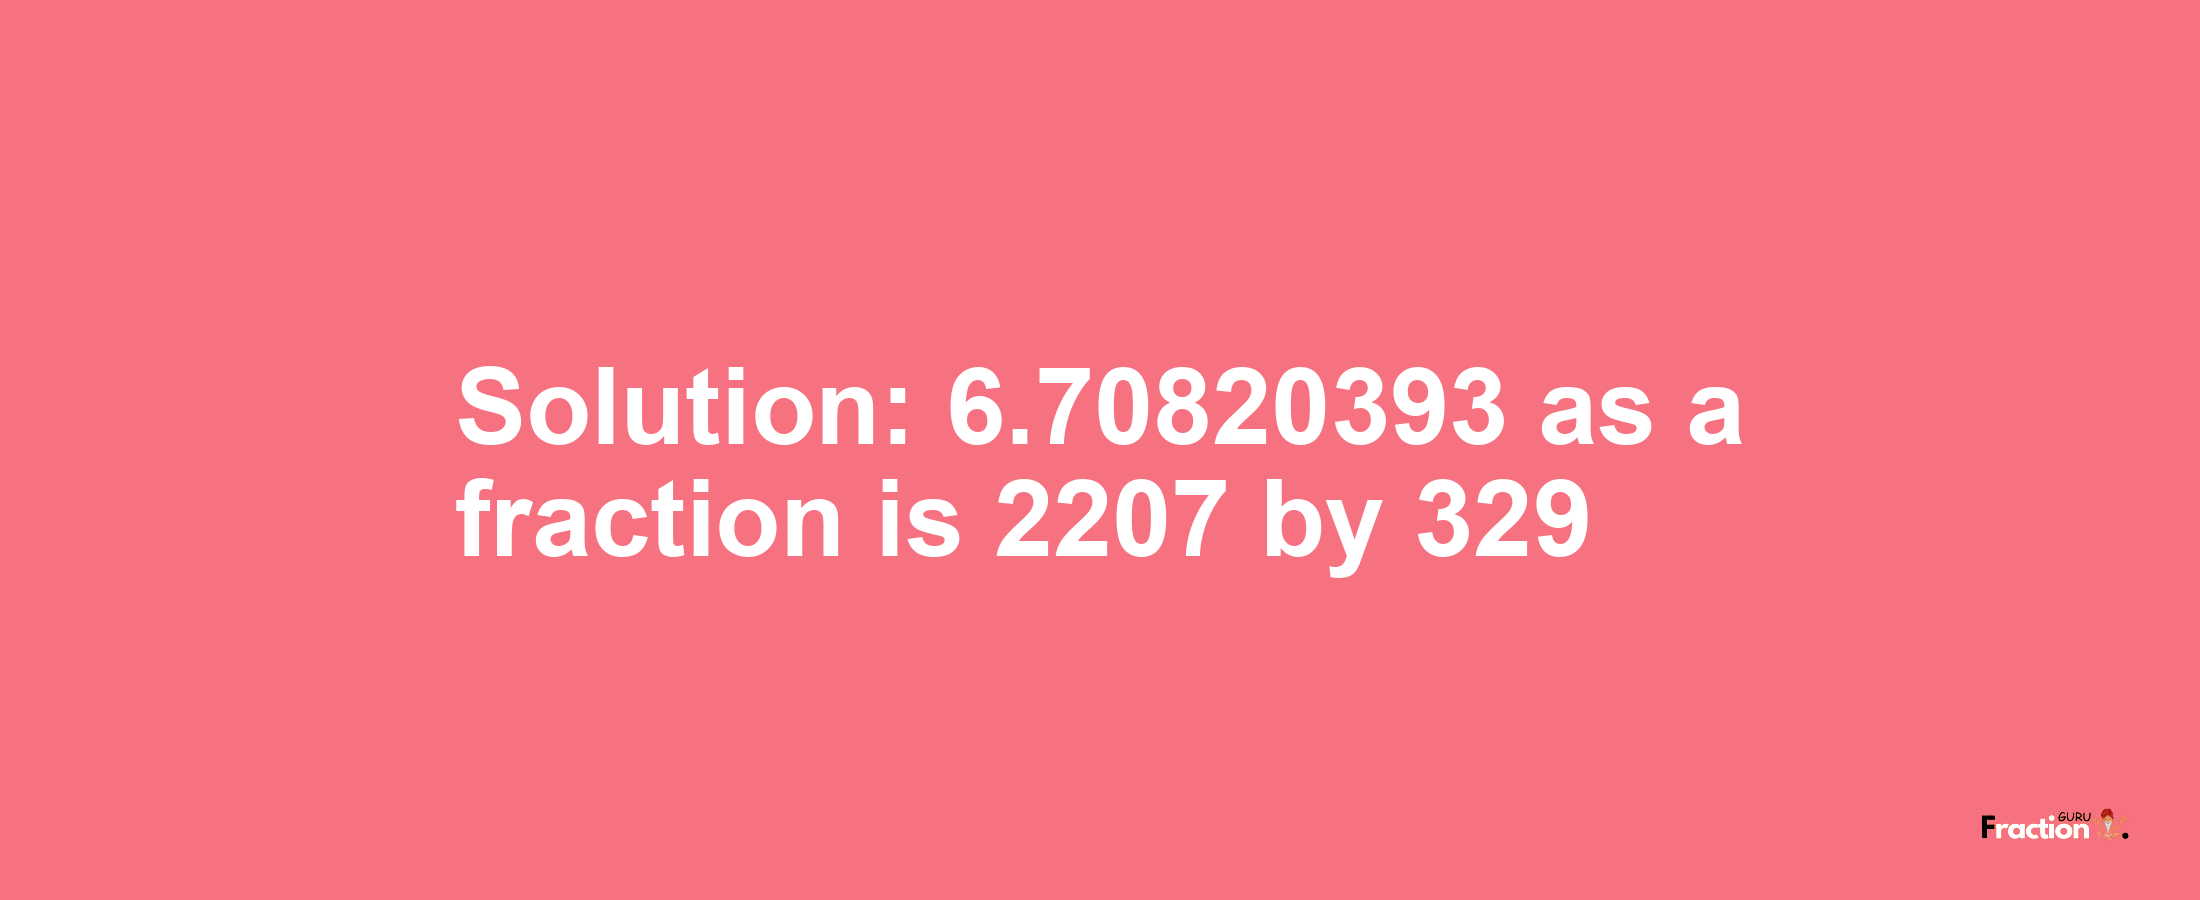 Solution:6.70820393 as a fraction is 2207/329